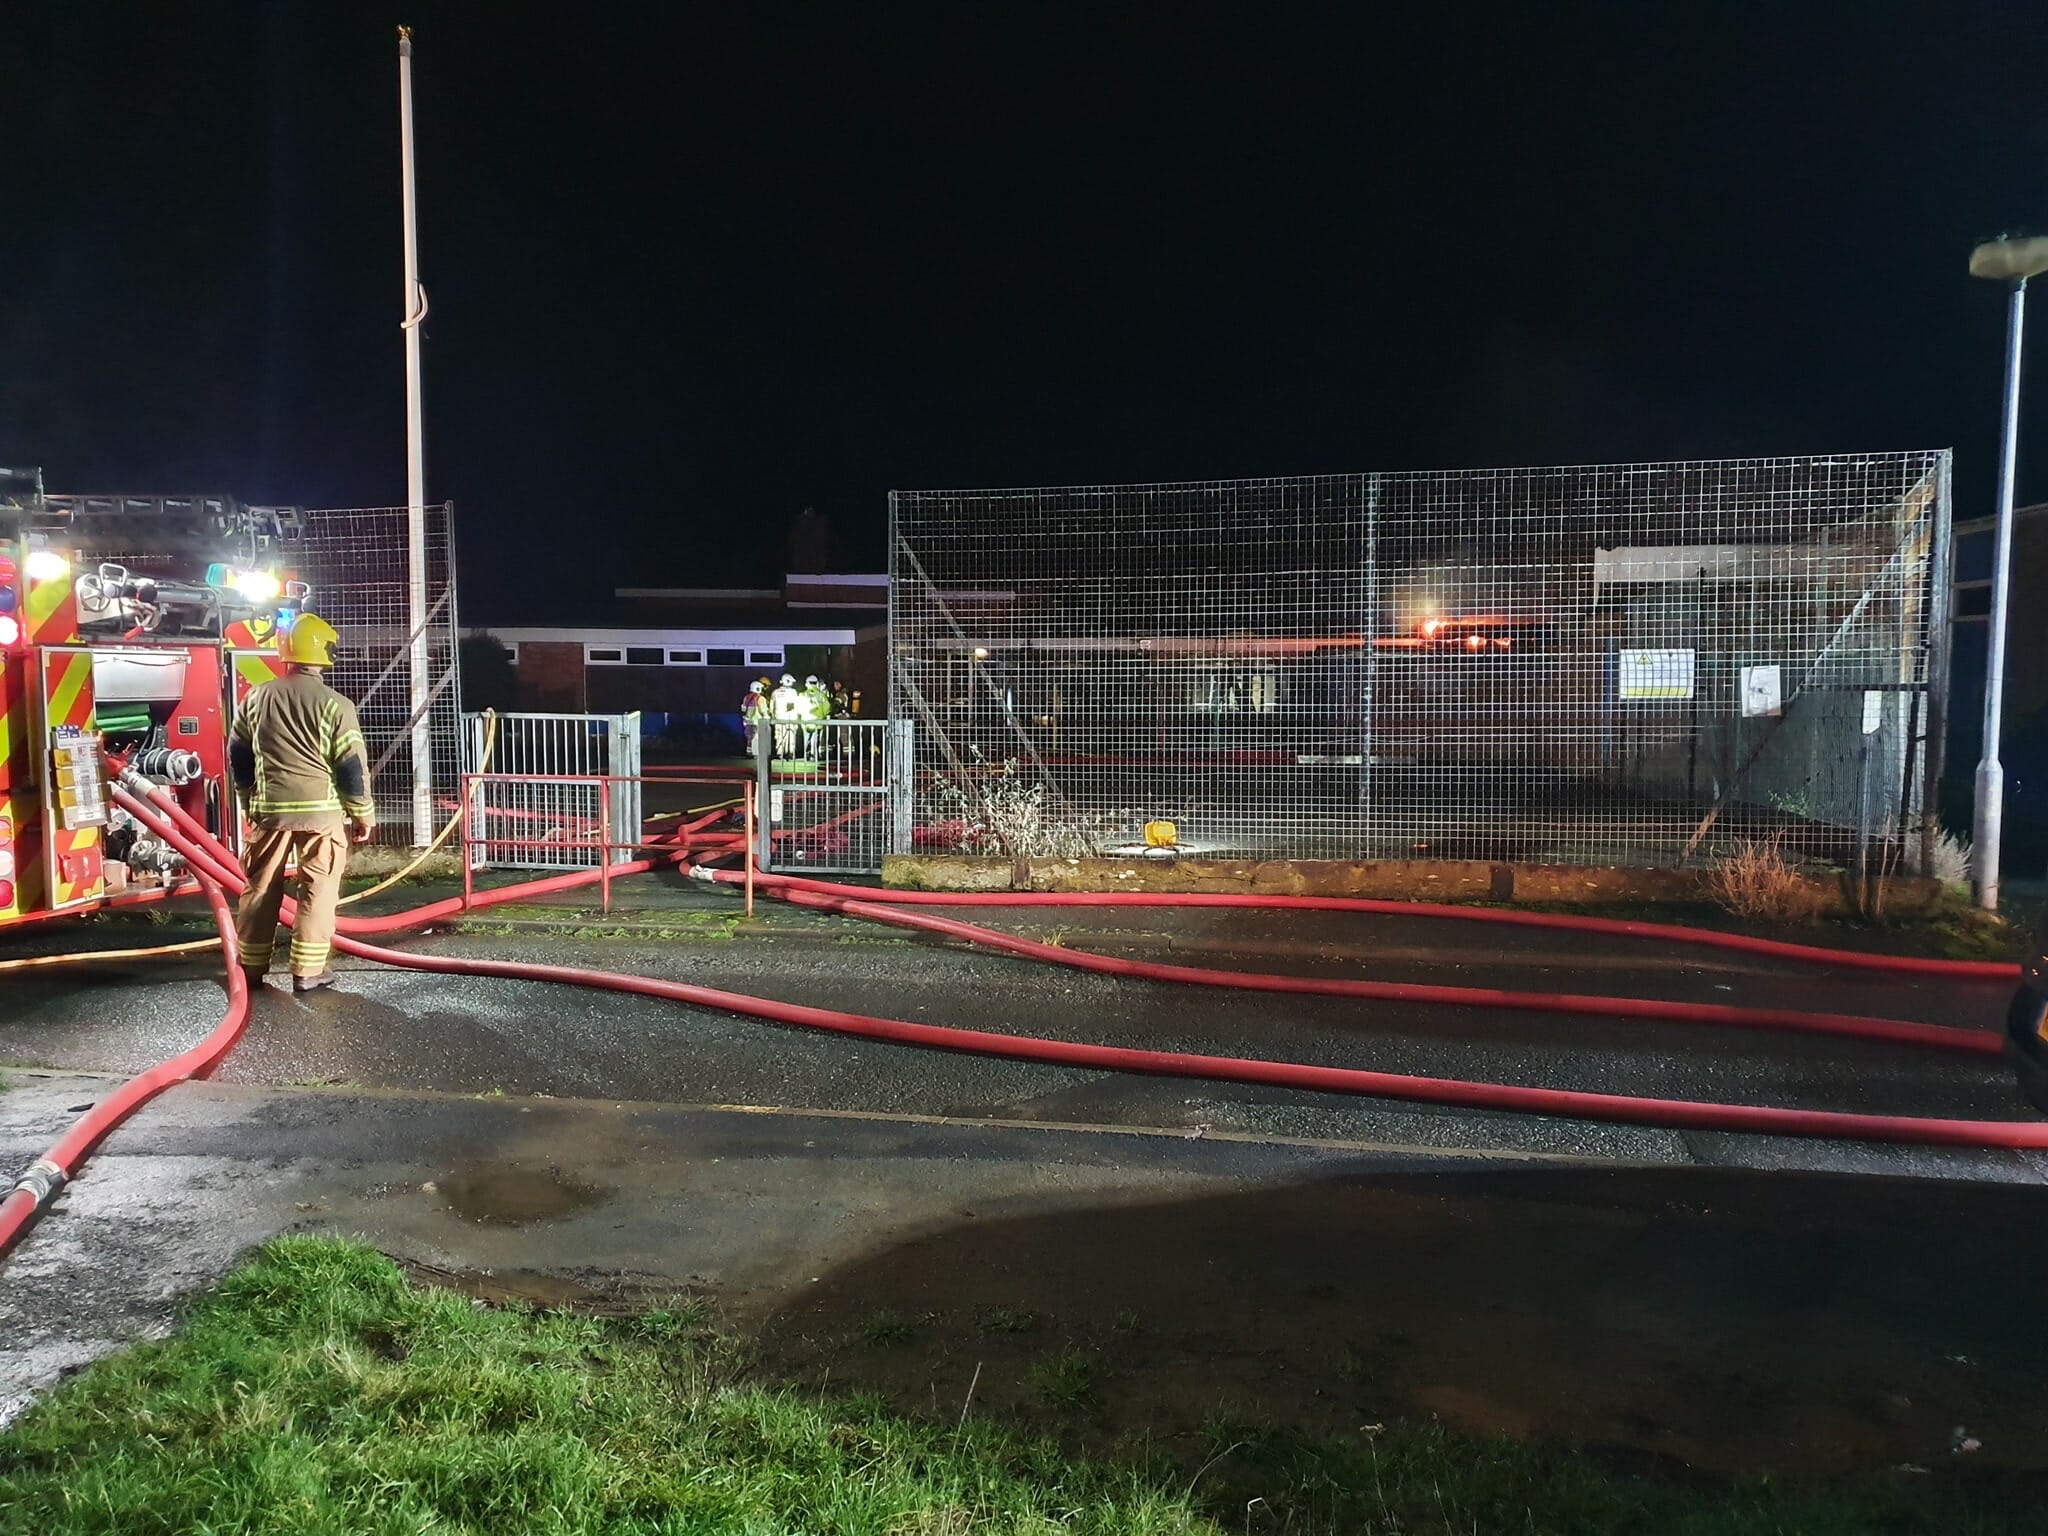 NEWS | Fire destroys former school building in Hereford